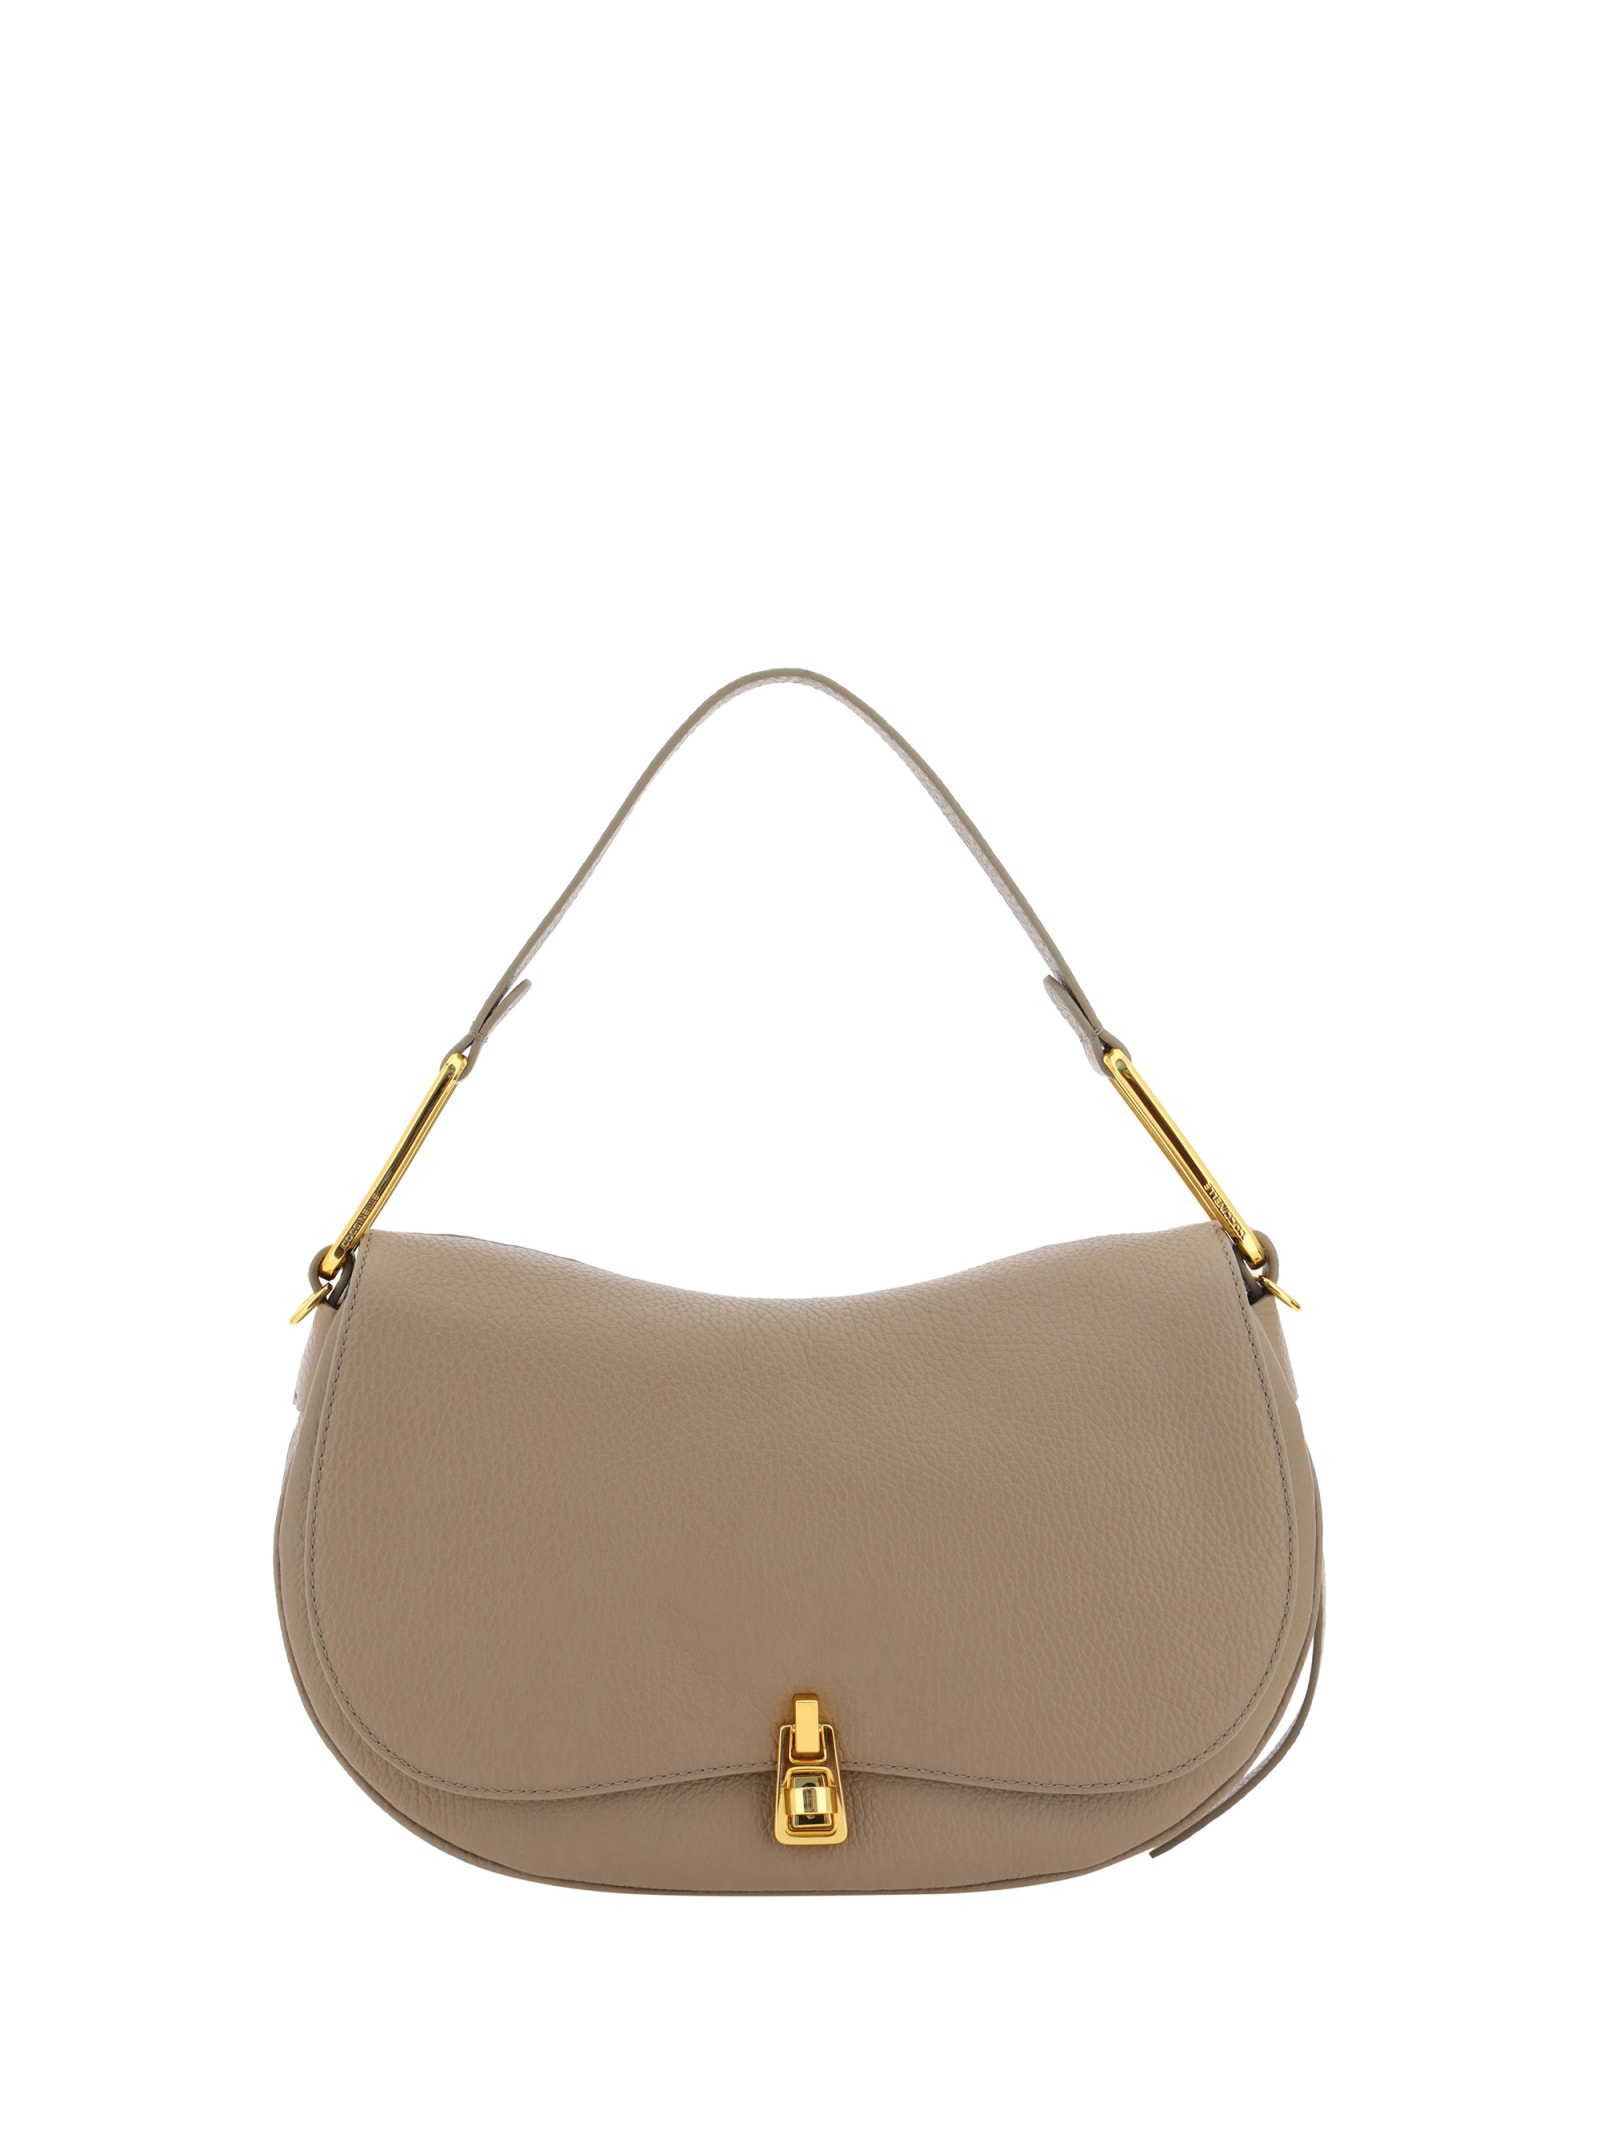 Coccinelle Maggie Shoulder Bag In Warm Taupe